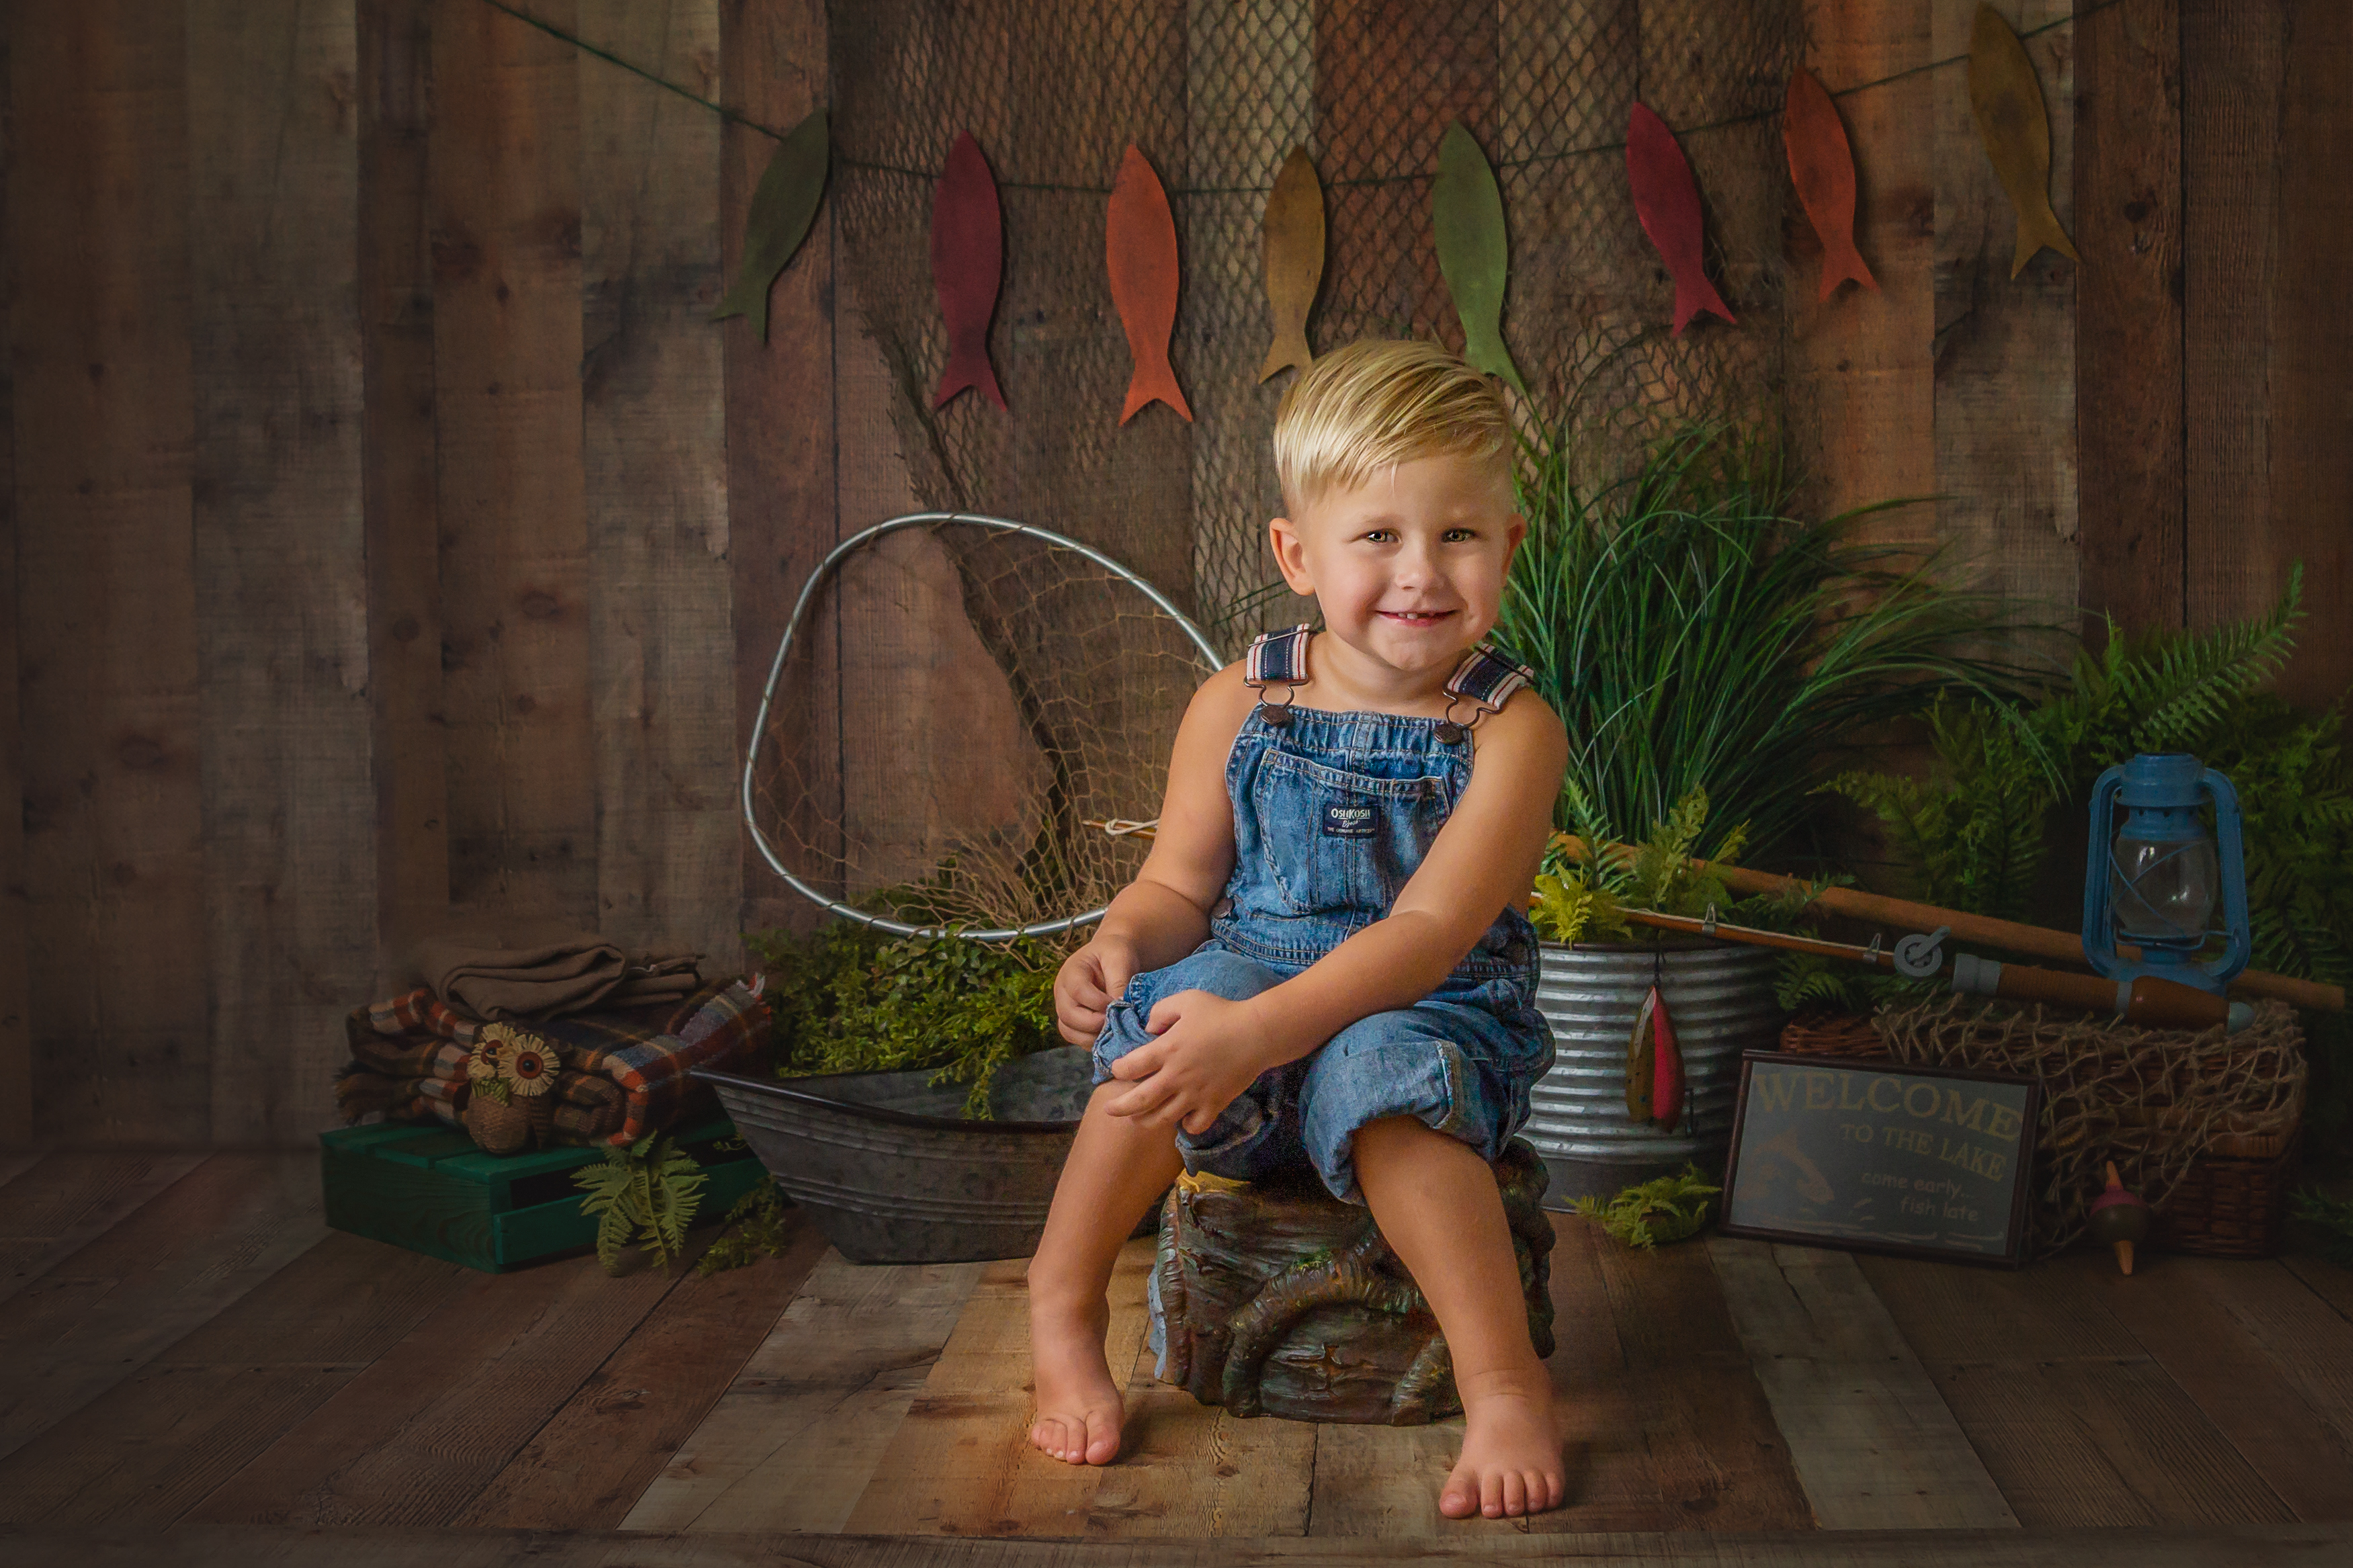 Fishing Mini Session, Mini Session, Minis, Fishing Minis, boys, Studio Mini Session, Watch Me Grow, Baby, Child, Photography, Session, Casi Ann Photography, studio, 3 year, overalls, vines, fish, Ingleside, Rockford, Illinois, portrait, kids, 3 years